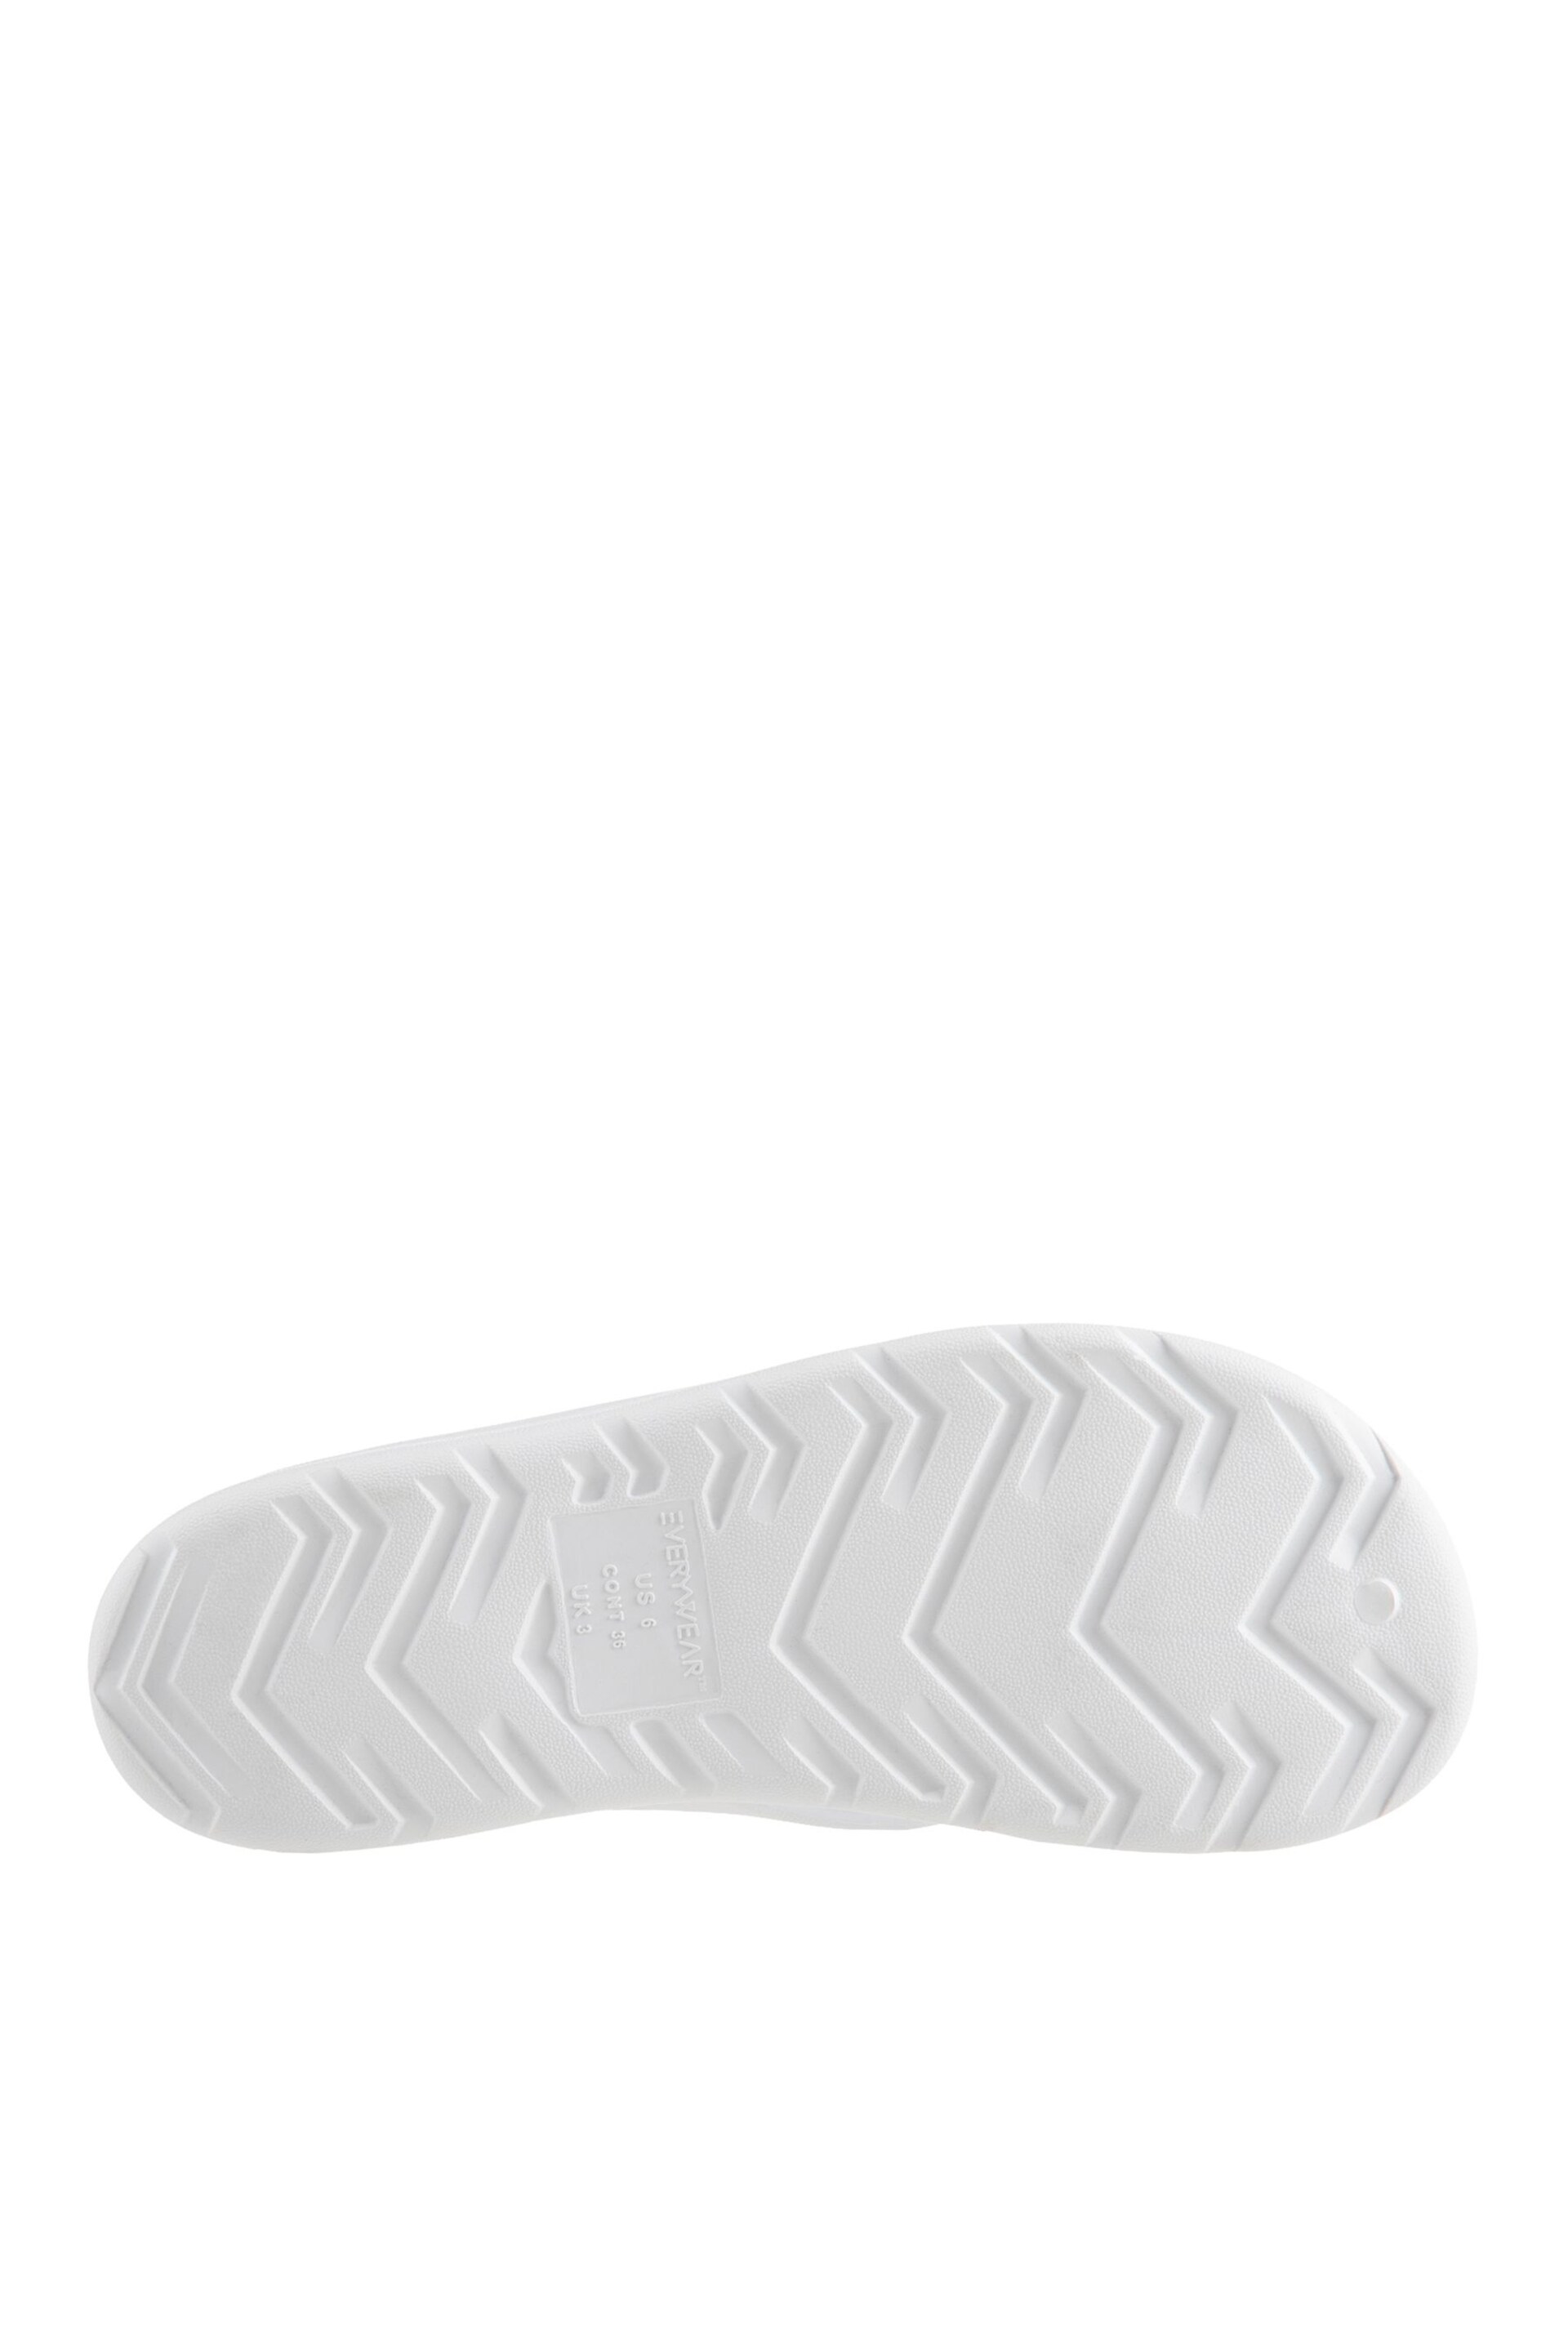 Totes White Ladies Solbounce Toe Post Flip Flops Sandals - Image 5 of 5